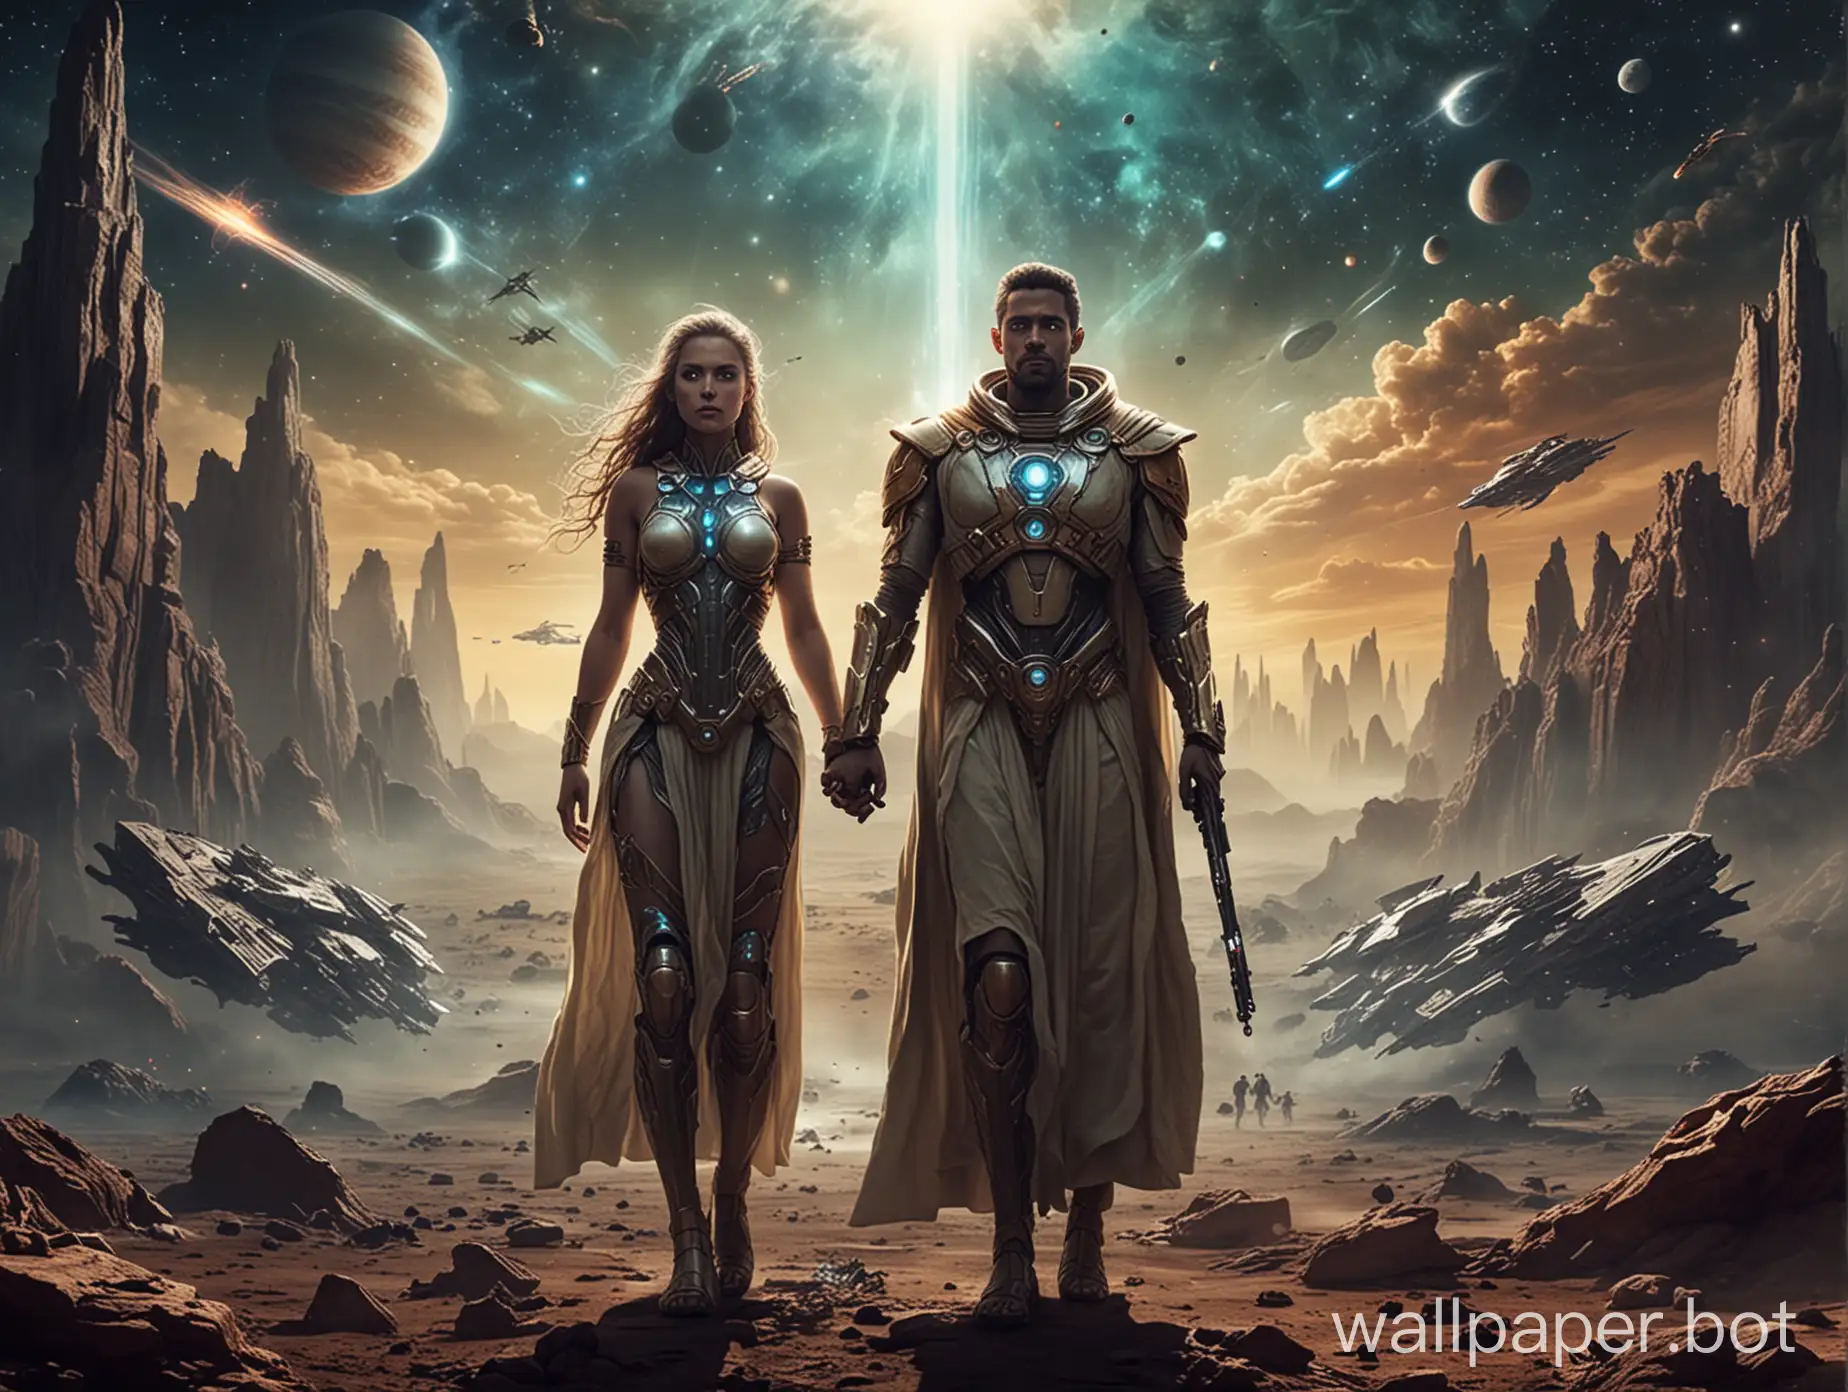 Futuristic-Illustration-of-Powerful-Beings-People-as-Gods-Science-Fiction-Poster